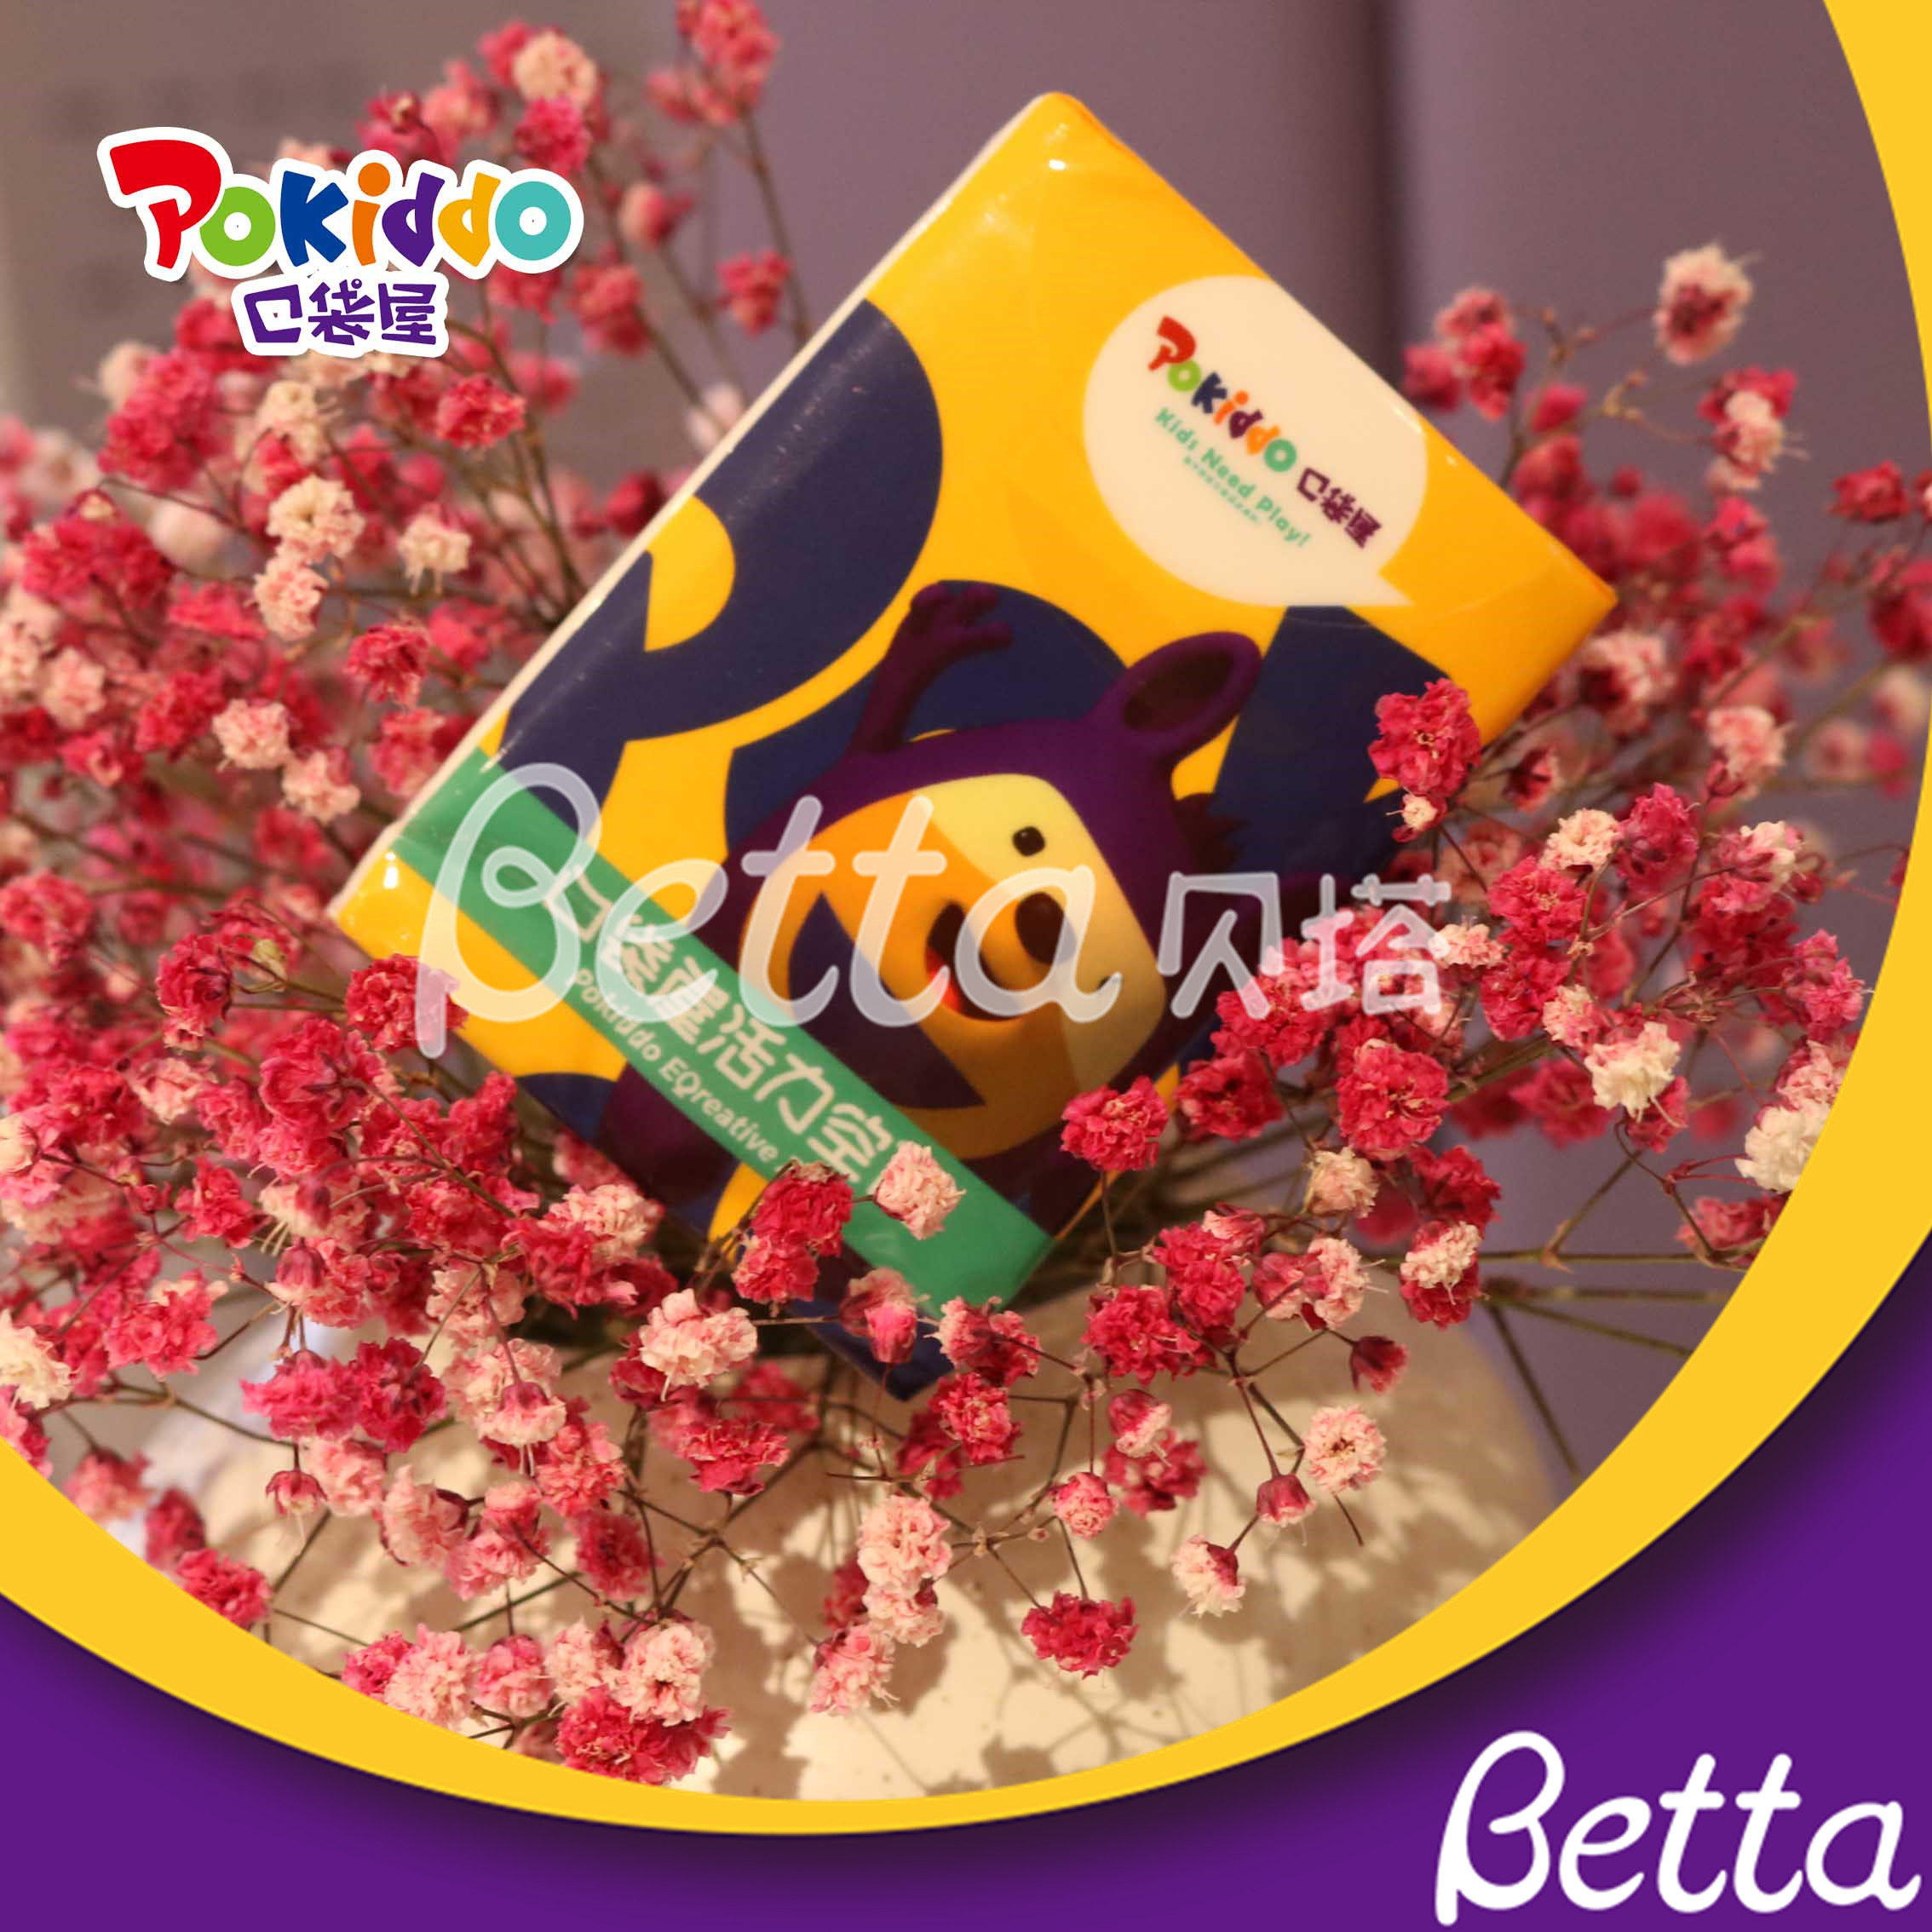 Pokiddo Franchise Products For Indoor Playground Promotion Mini Disposable Facial Pocket Tissue